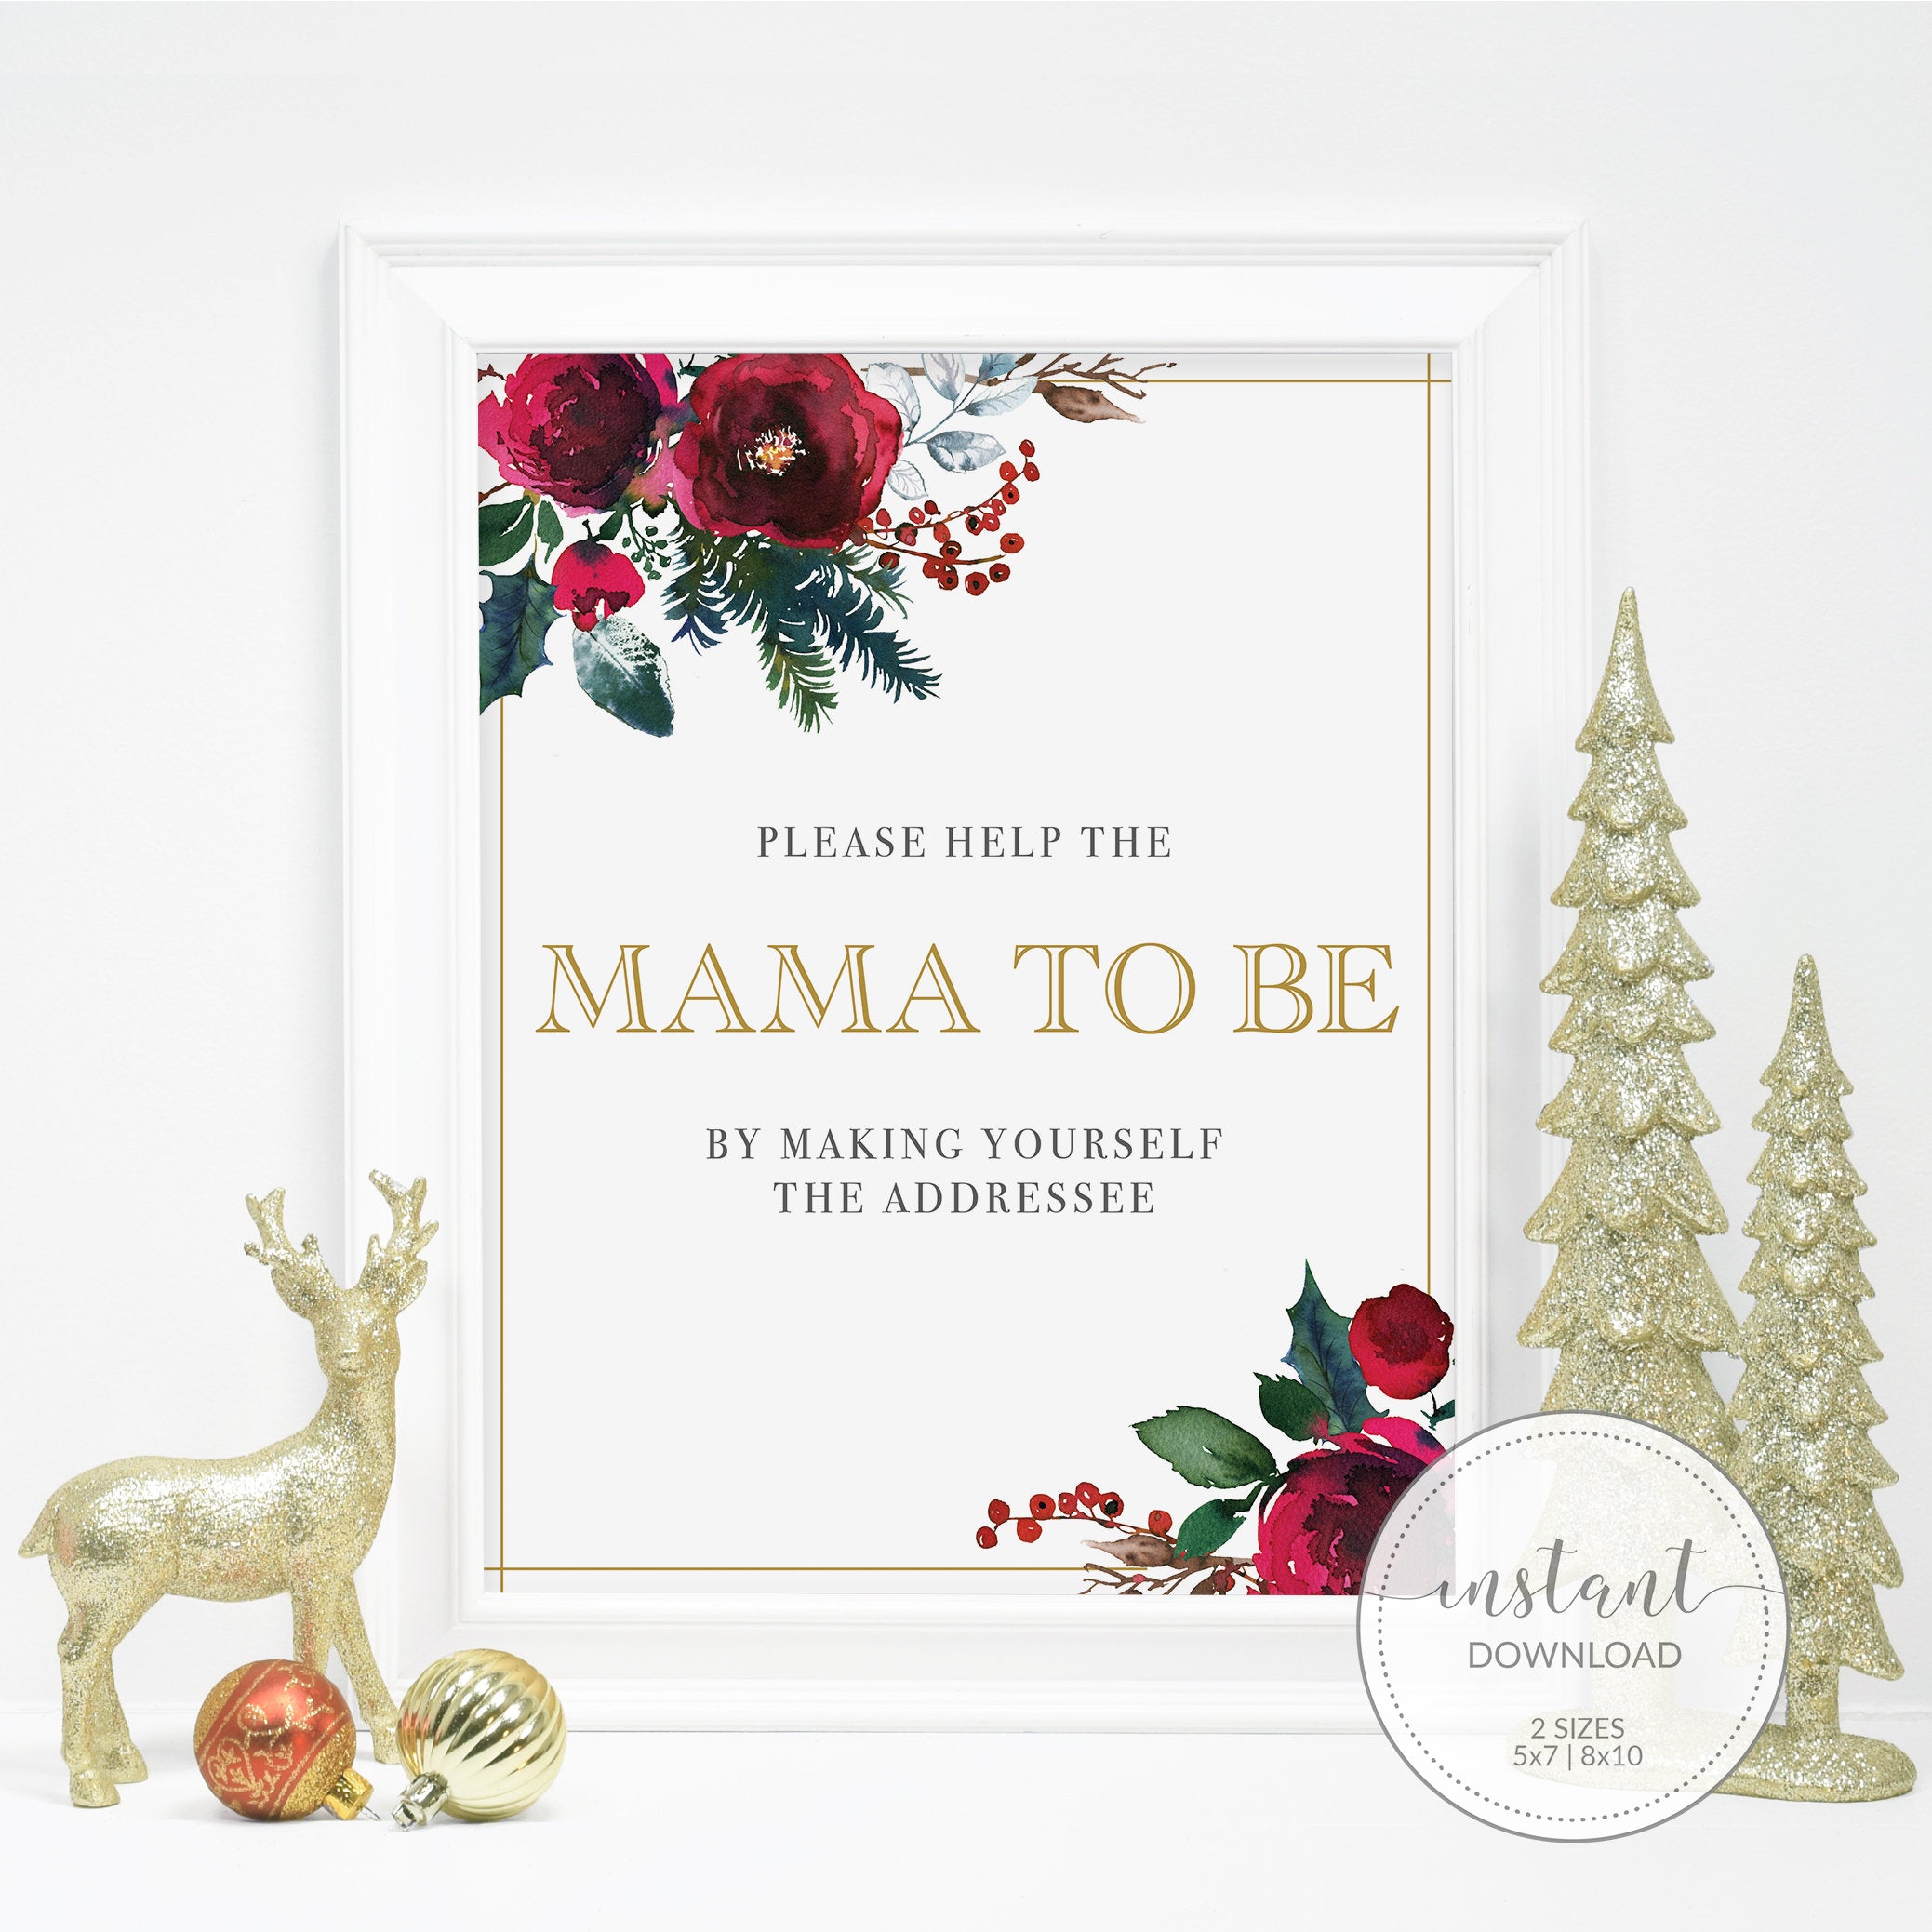 Christmas Baby Shower Addressee Sign Printable, Address an Envelope Sign, Winter Baby Shower Decorations, INSTANT DOWNLOAD - CG100 - @PlumPolkaDot 